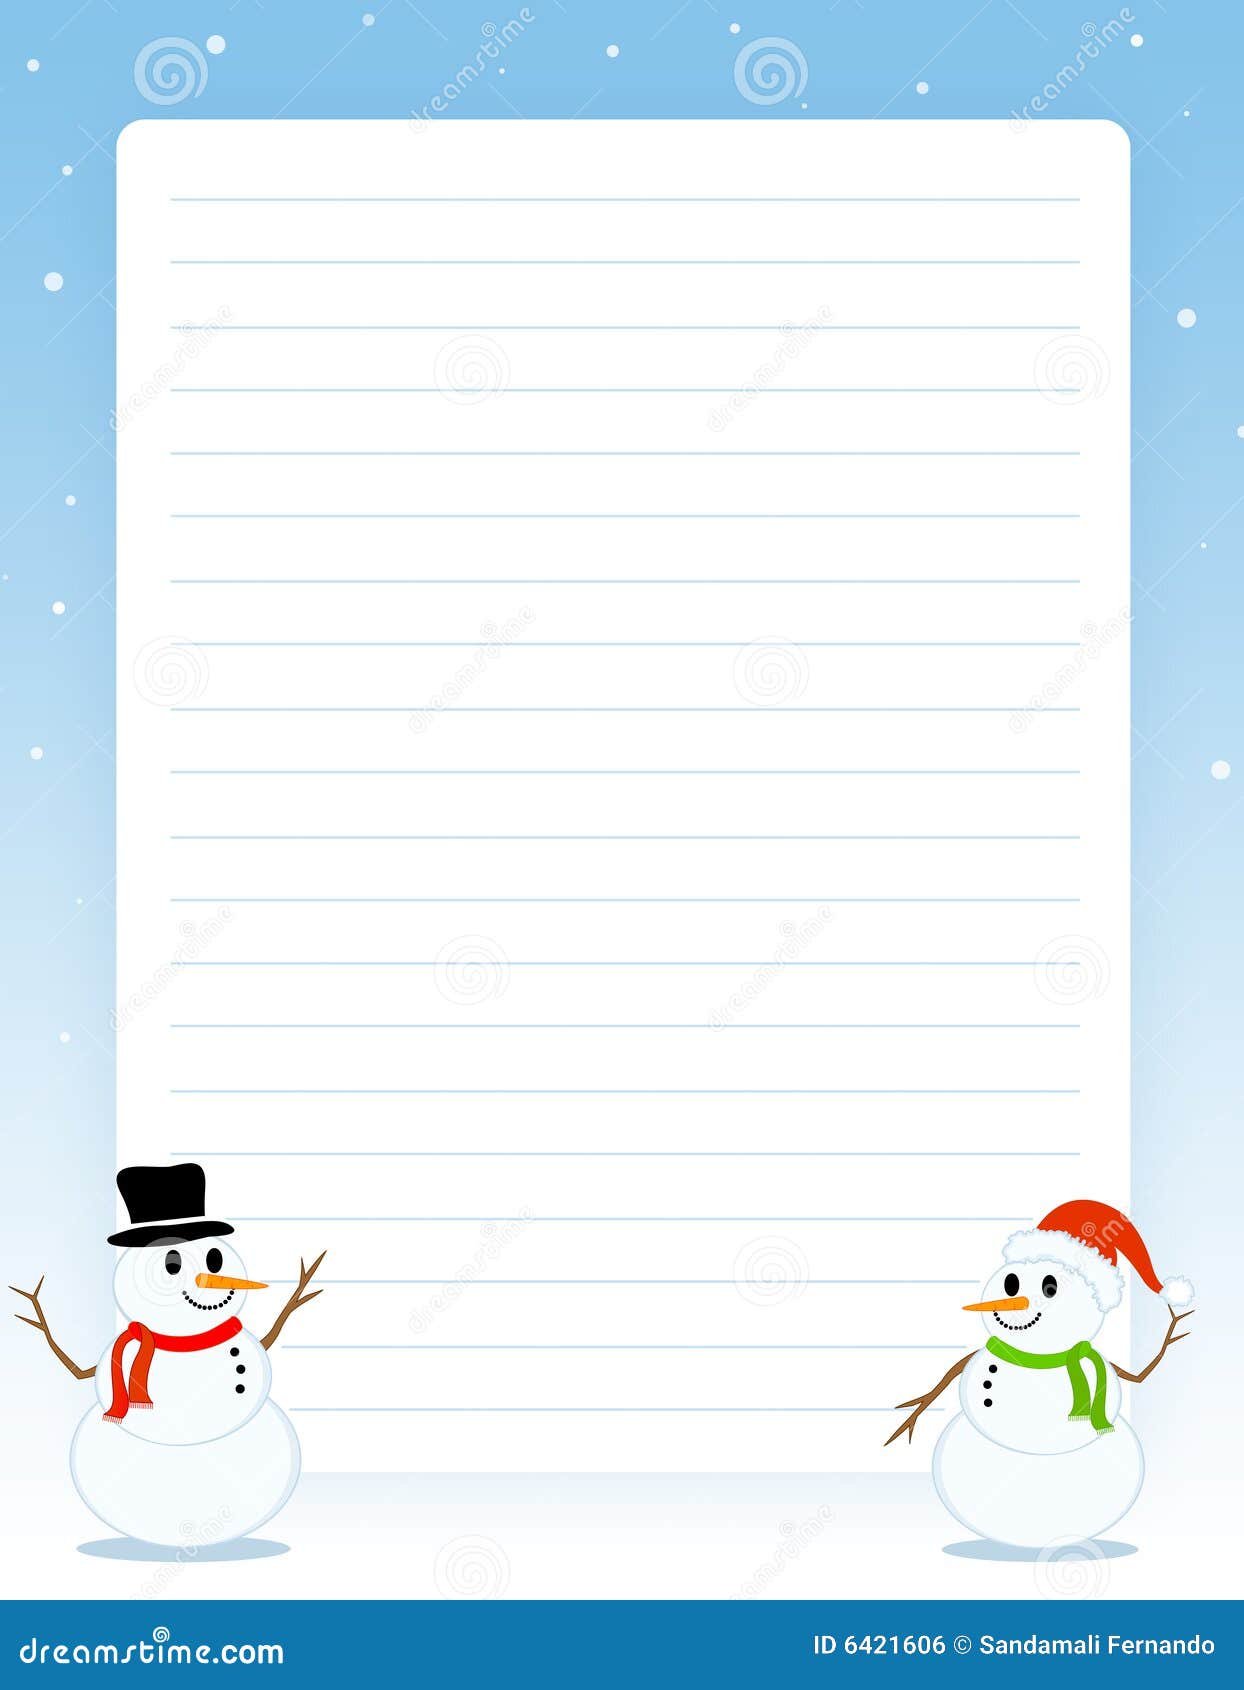 christmas-border-note-paper-royalty-free-stock-image-image-6421606